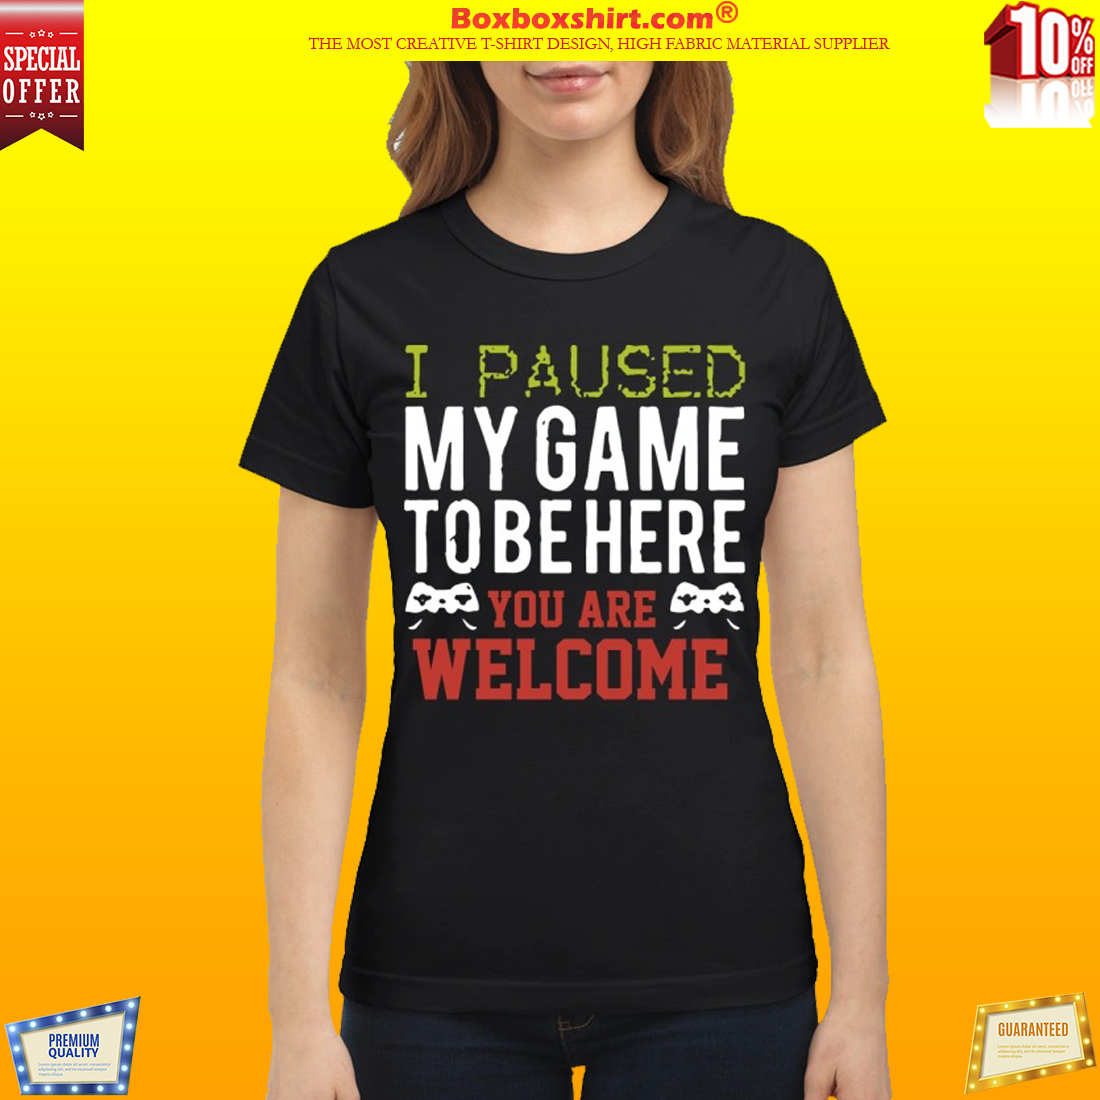 I pause my game to be here you are welcome classic shirt